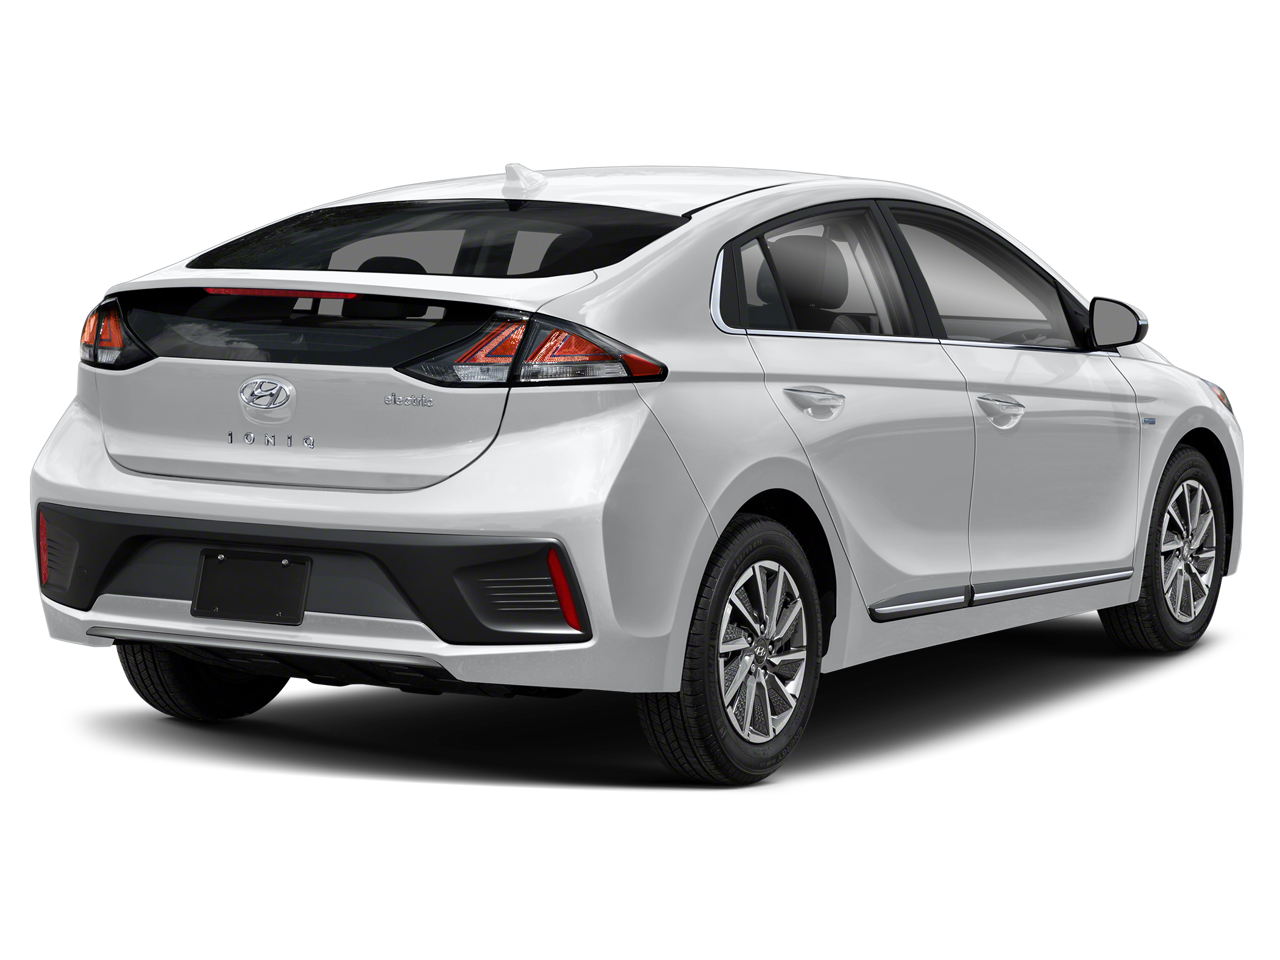 Used 2020 Hyundai IONIQ Limited with VIN KMHC85LJXLU072534 for sale in Los Angeles, CA